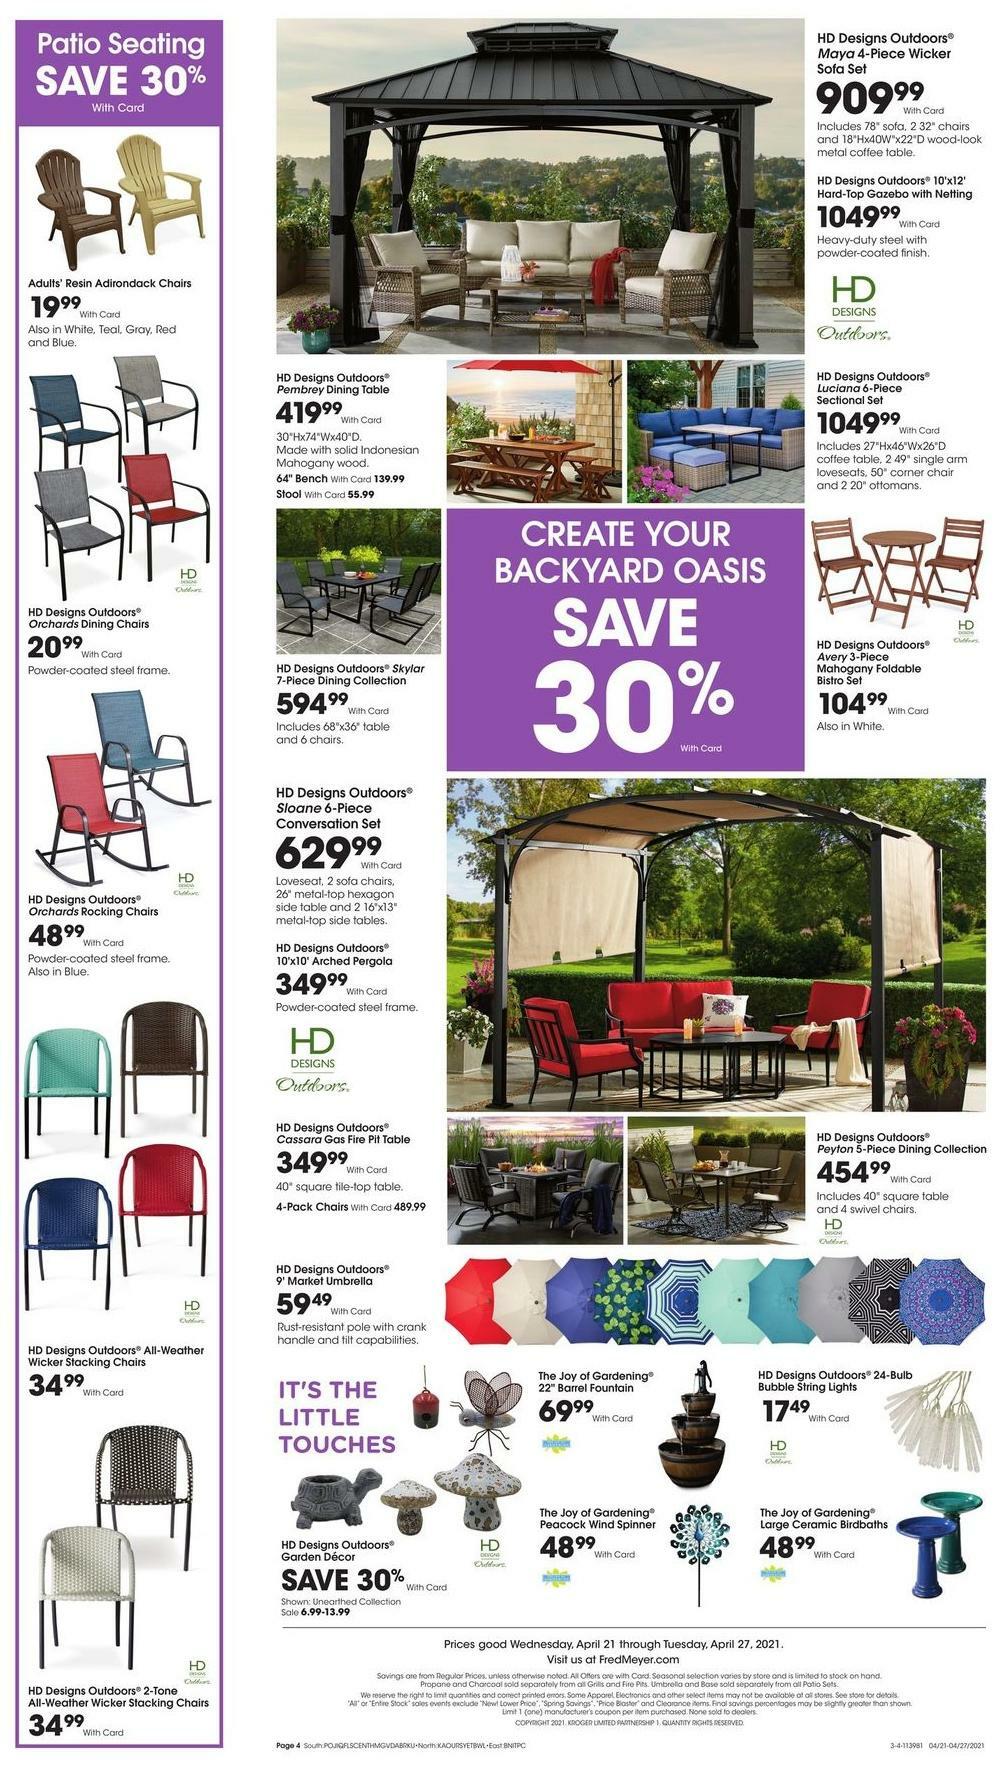 Fred Meyer Garden Weekly Ad from April 21